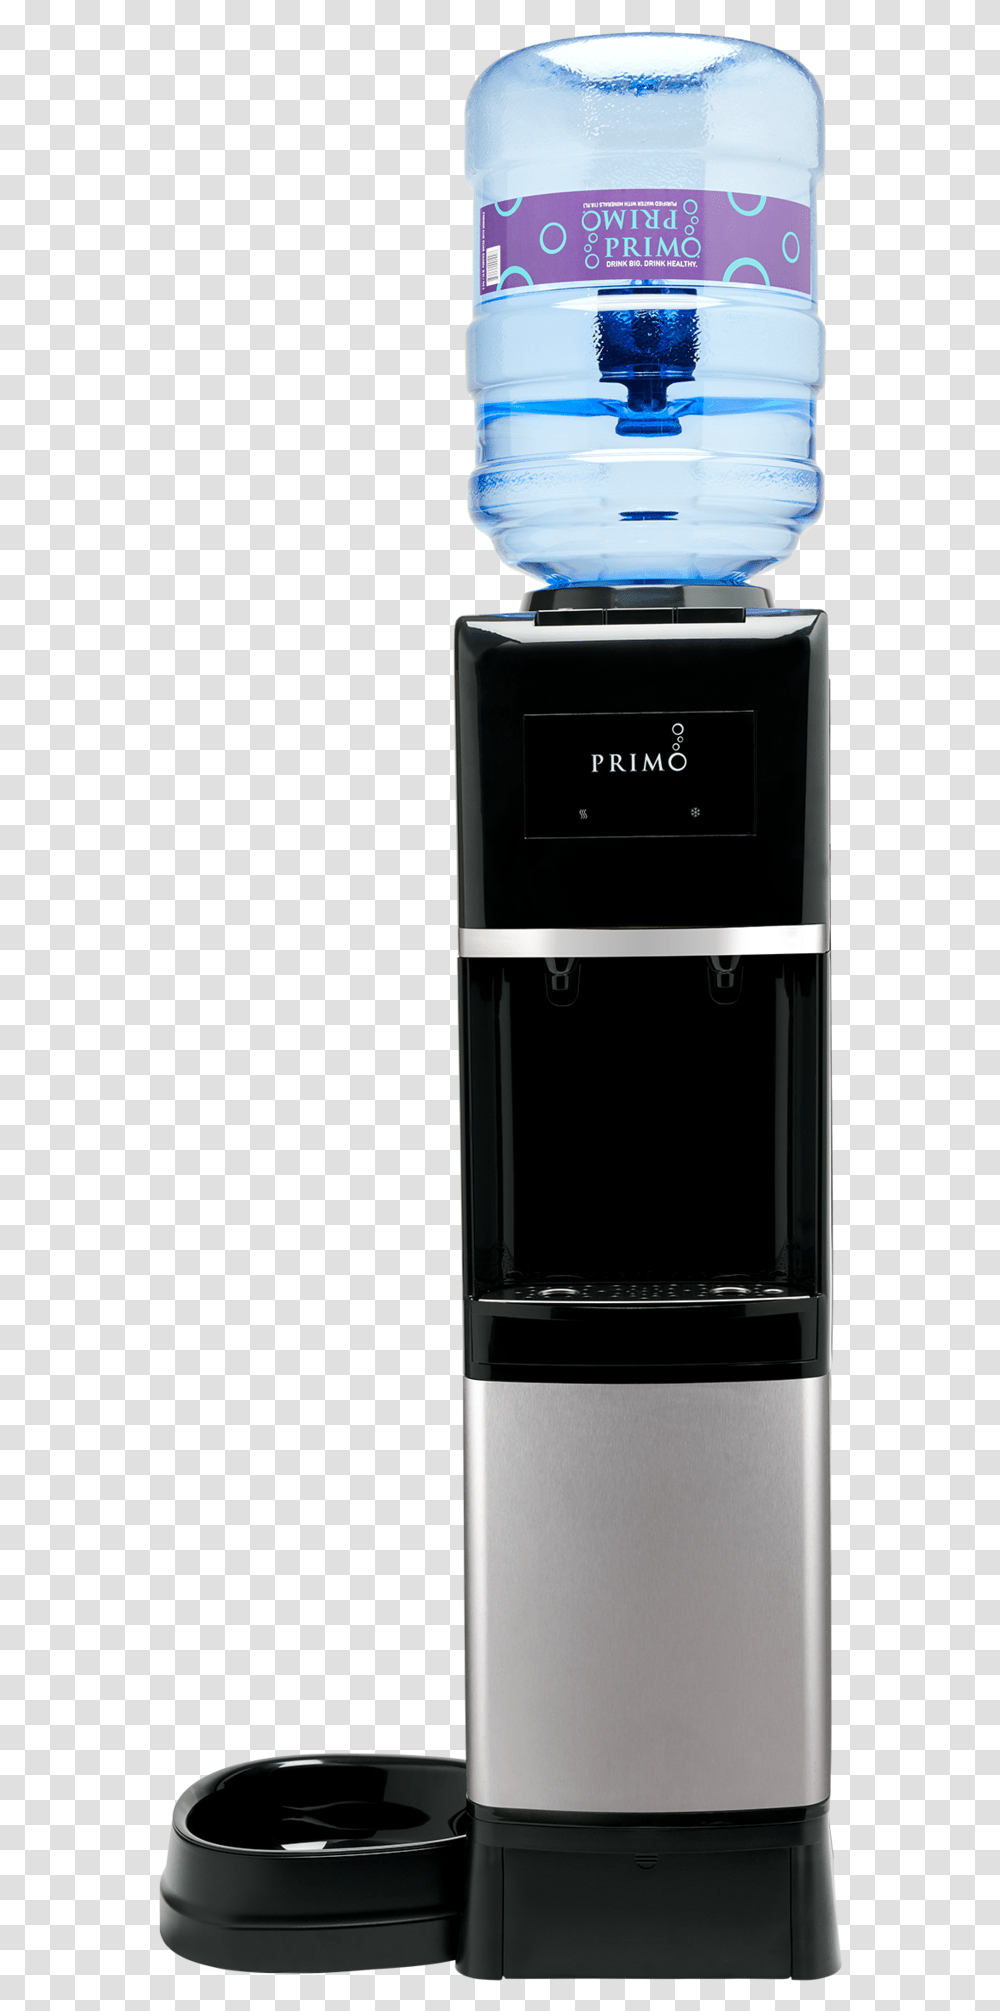 Water Containers For Pets, Appliance, Phone, Electronics, Mixer Transparent Png